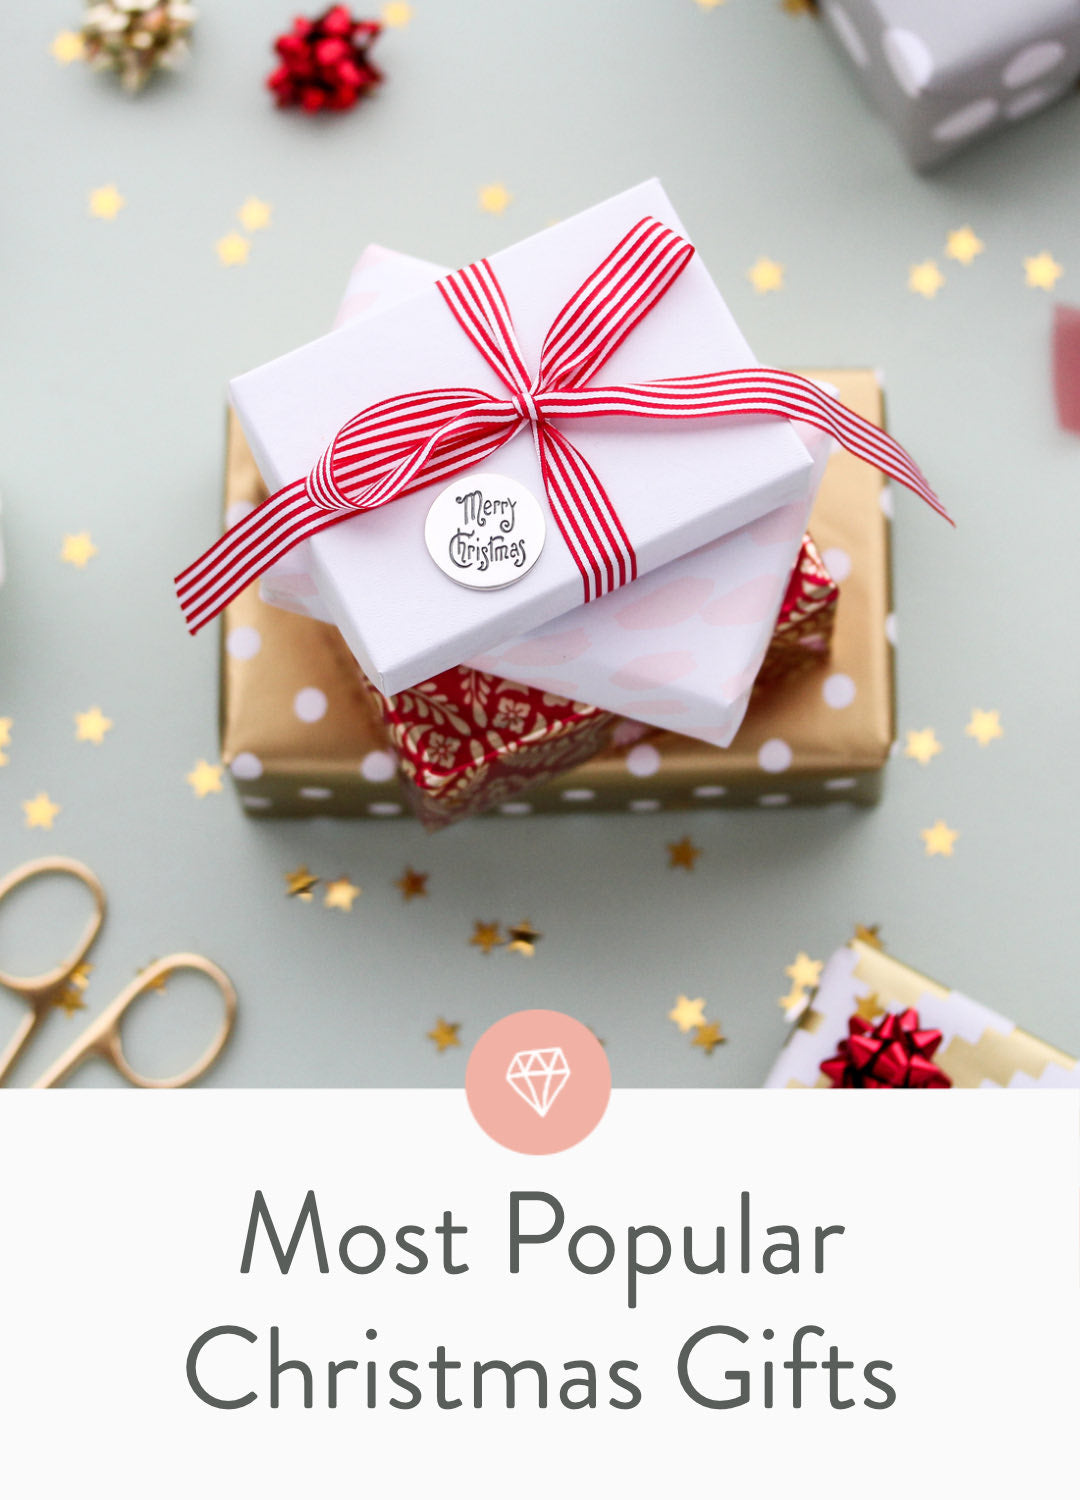 Most popular Christmas gifts for women in 2021